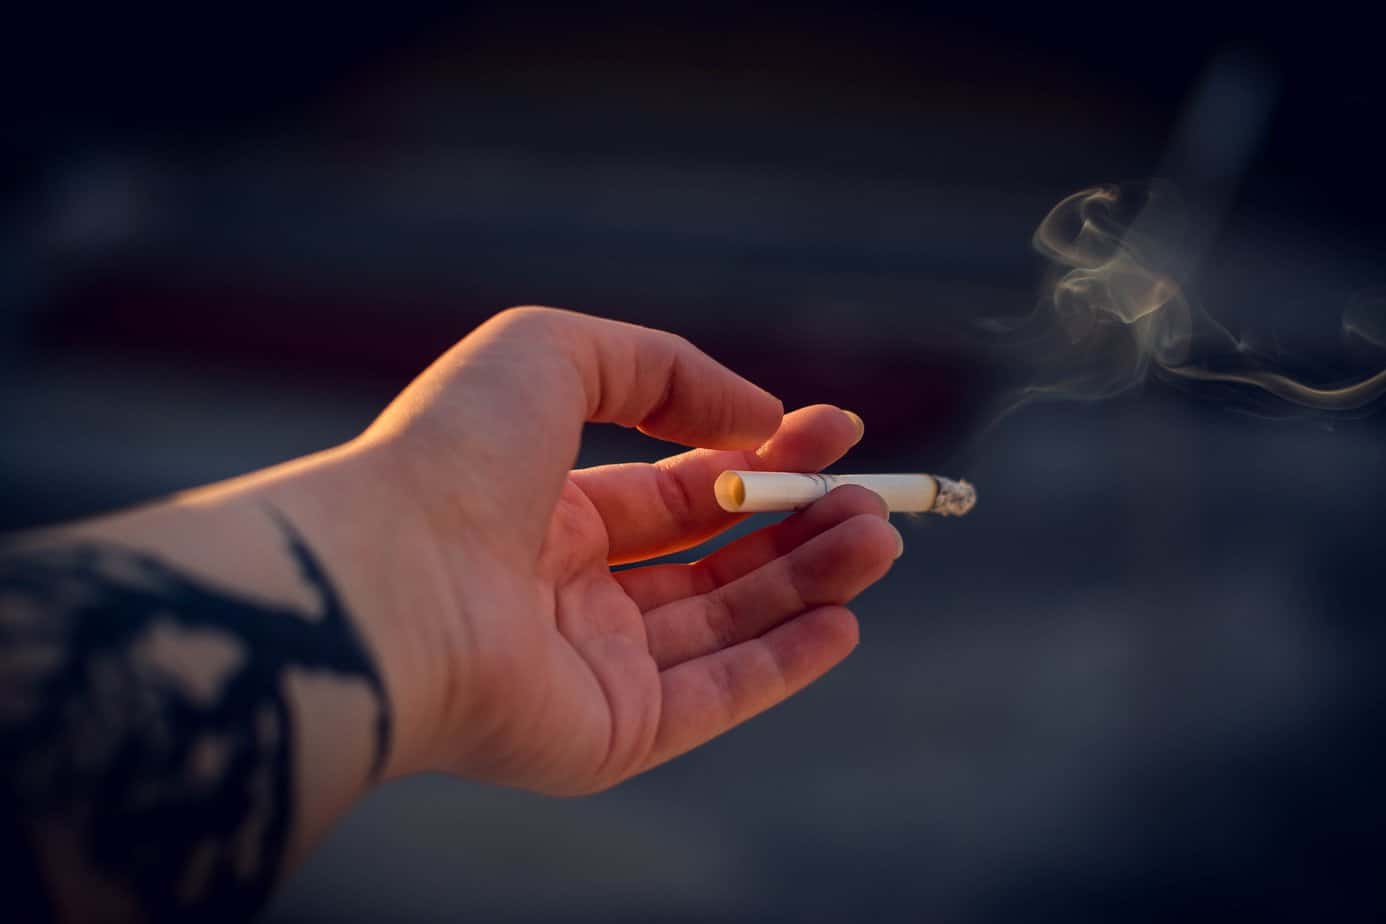 A person holds out a lit cigarette, smoking it